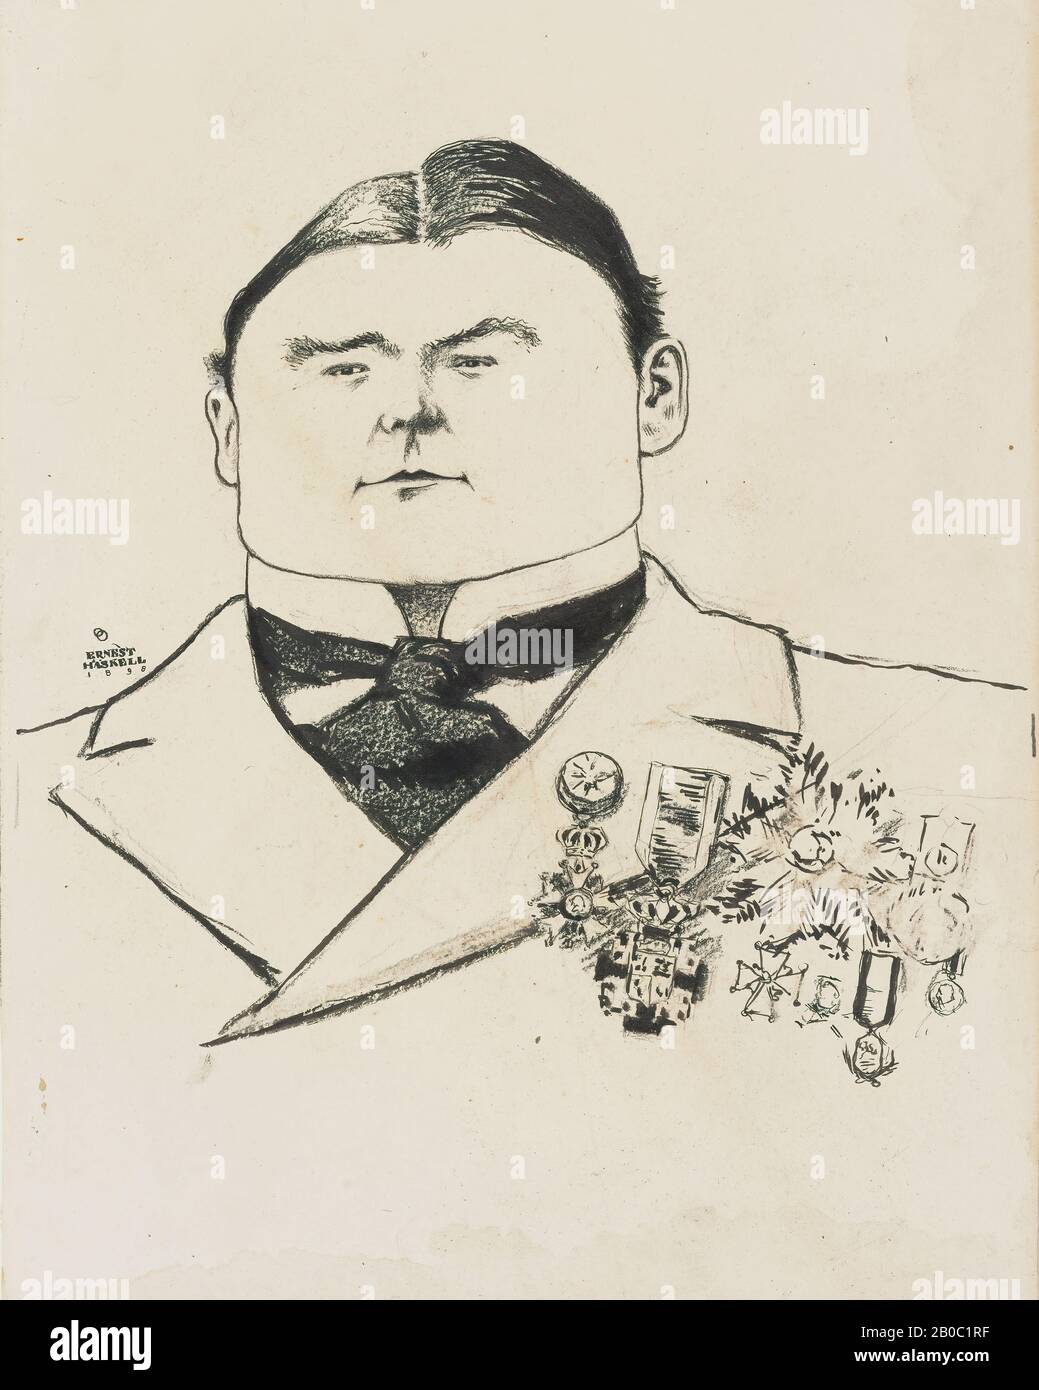 Ernest Haskell, Caricature of an Unknown Gentleman, 1898, graphite, black crayon, and black ink on off-white wove paper, 11 1/16 in. x 8 1/2 in. (28.1 cm x 21.6 cm Stock Photo